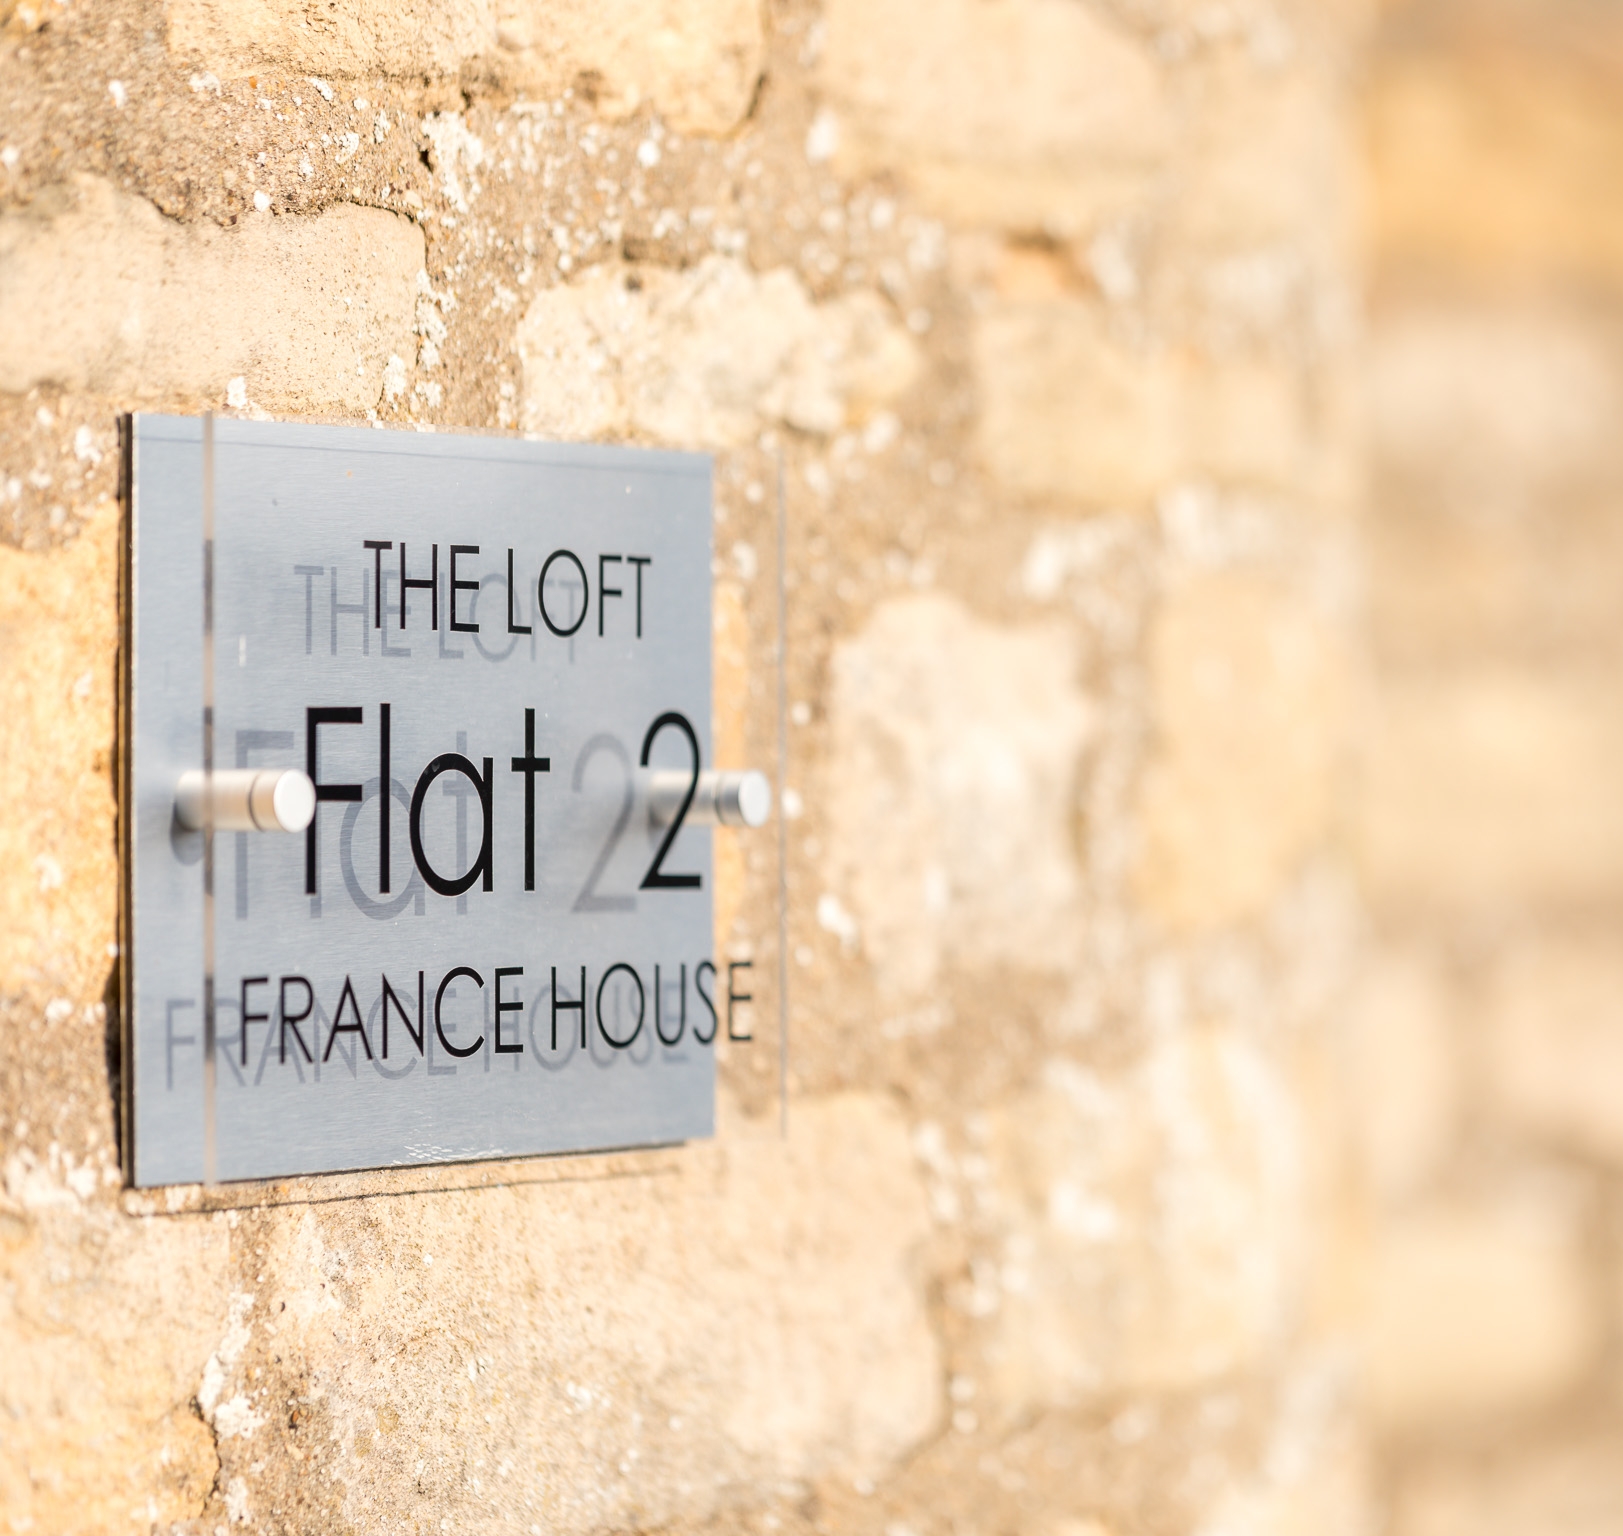 9 - The Loft - Stow-on-the-Wold - L Web.jpg